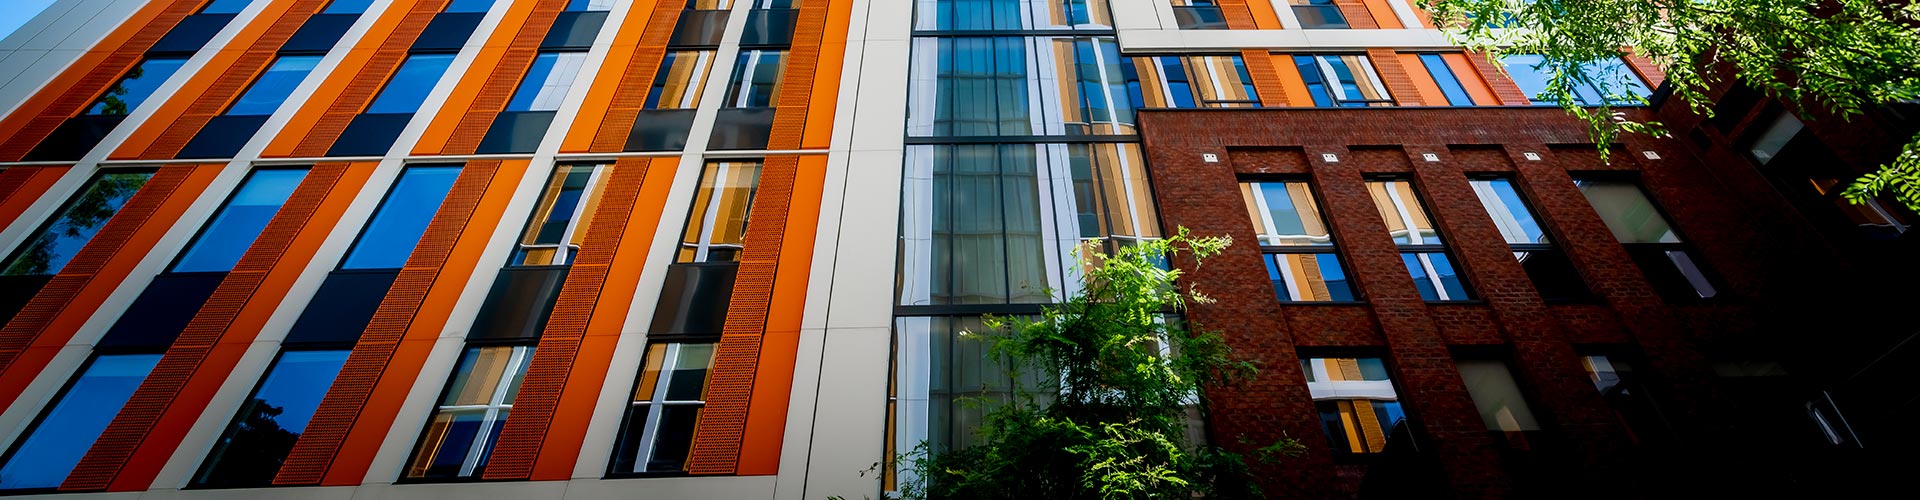 Orange cladding on the outside of the Bishop Gate building